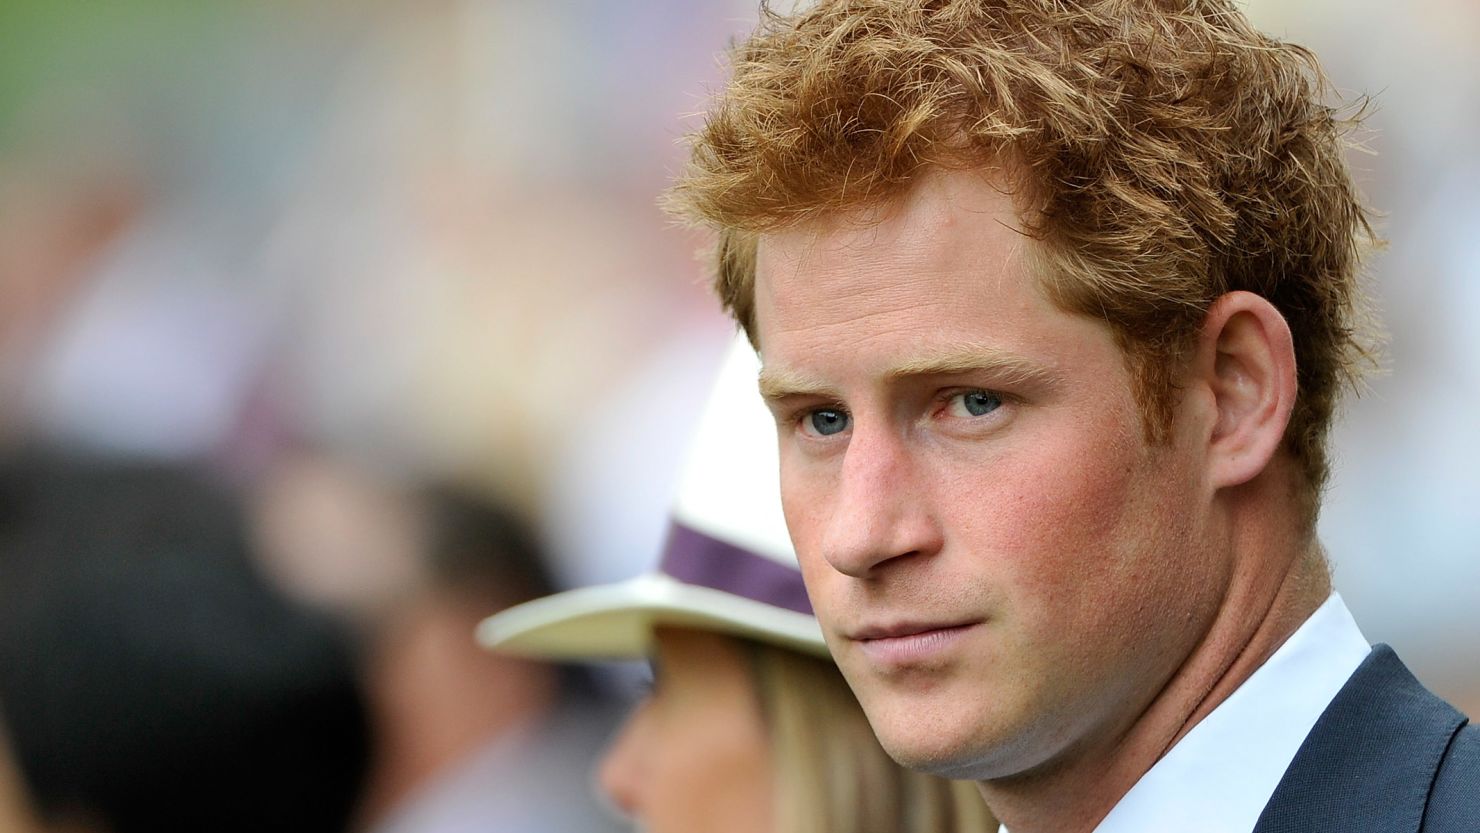 Prince Harry must be more cautious about the company he keeps, argues Robert Jobson.